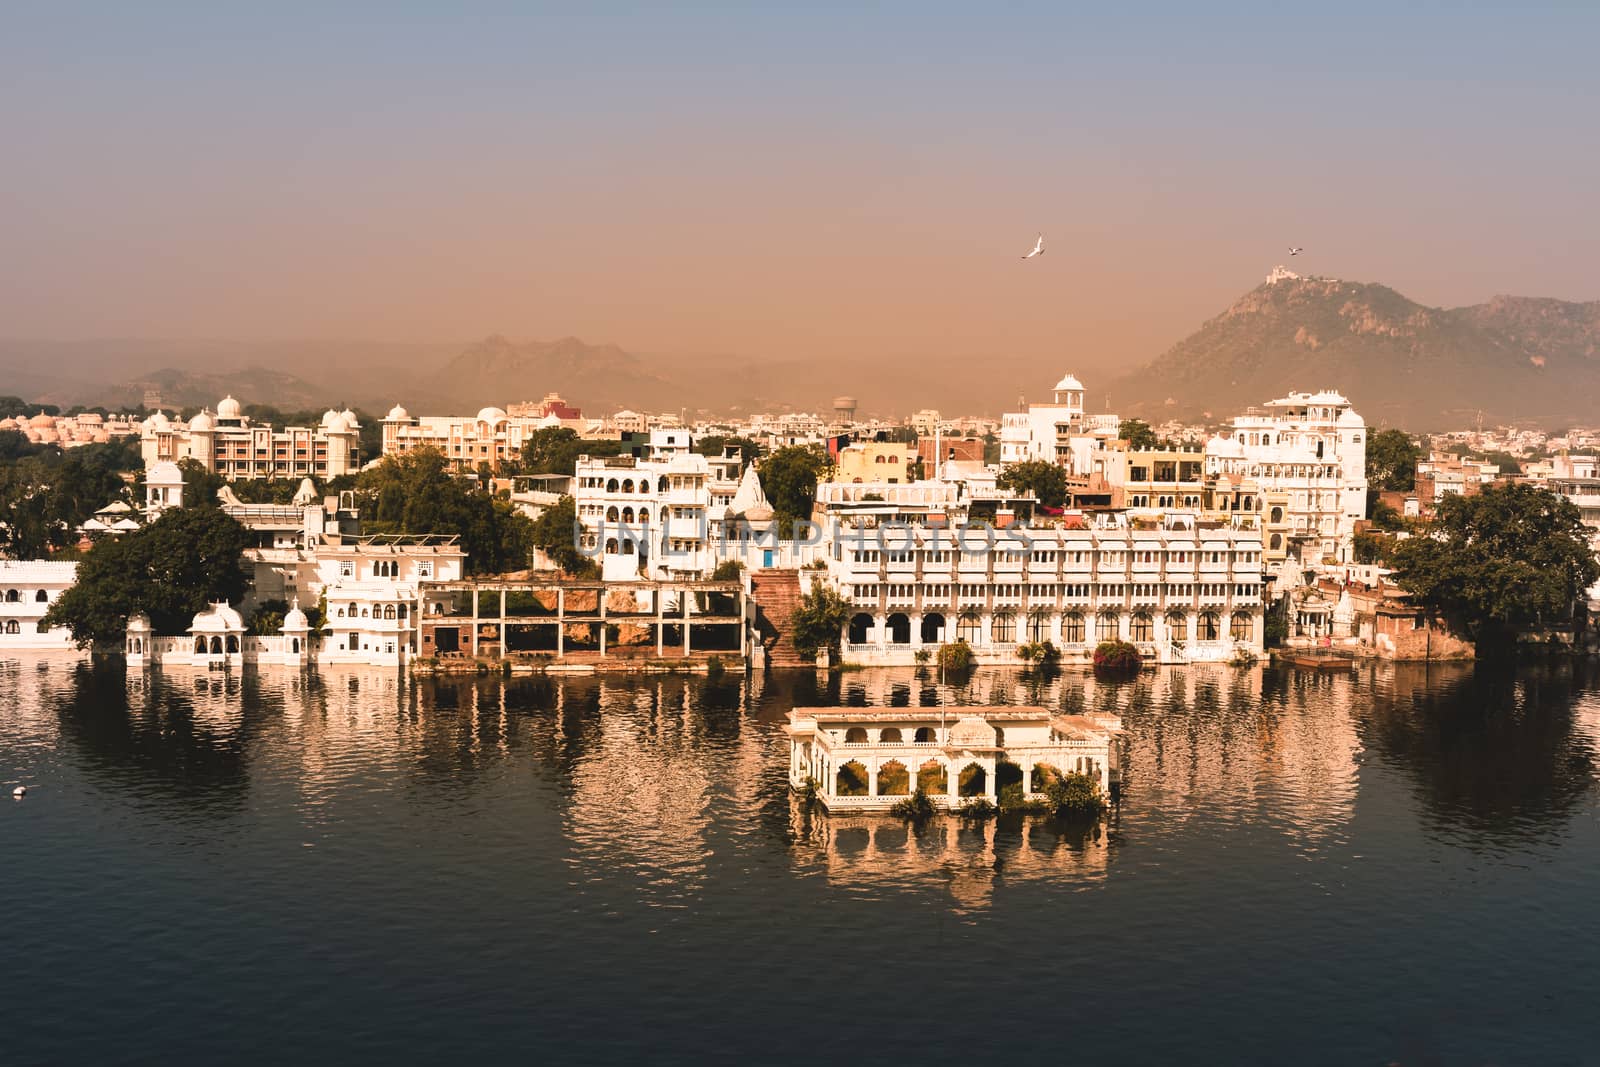 Reflection on water of "JAL MAHAL", Jaipur, Rajasthan by sudiptabhowmick